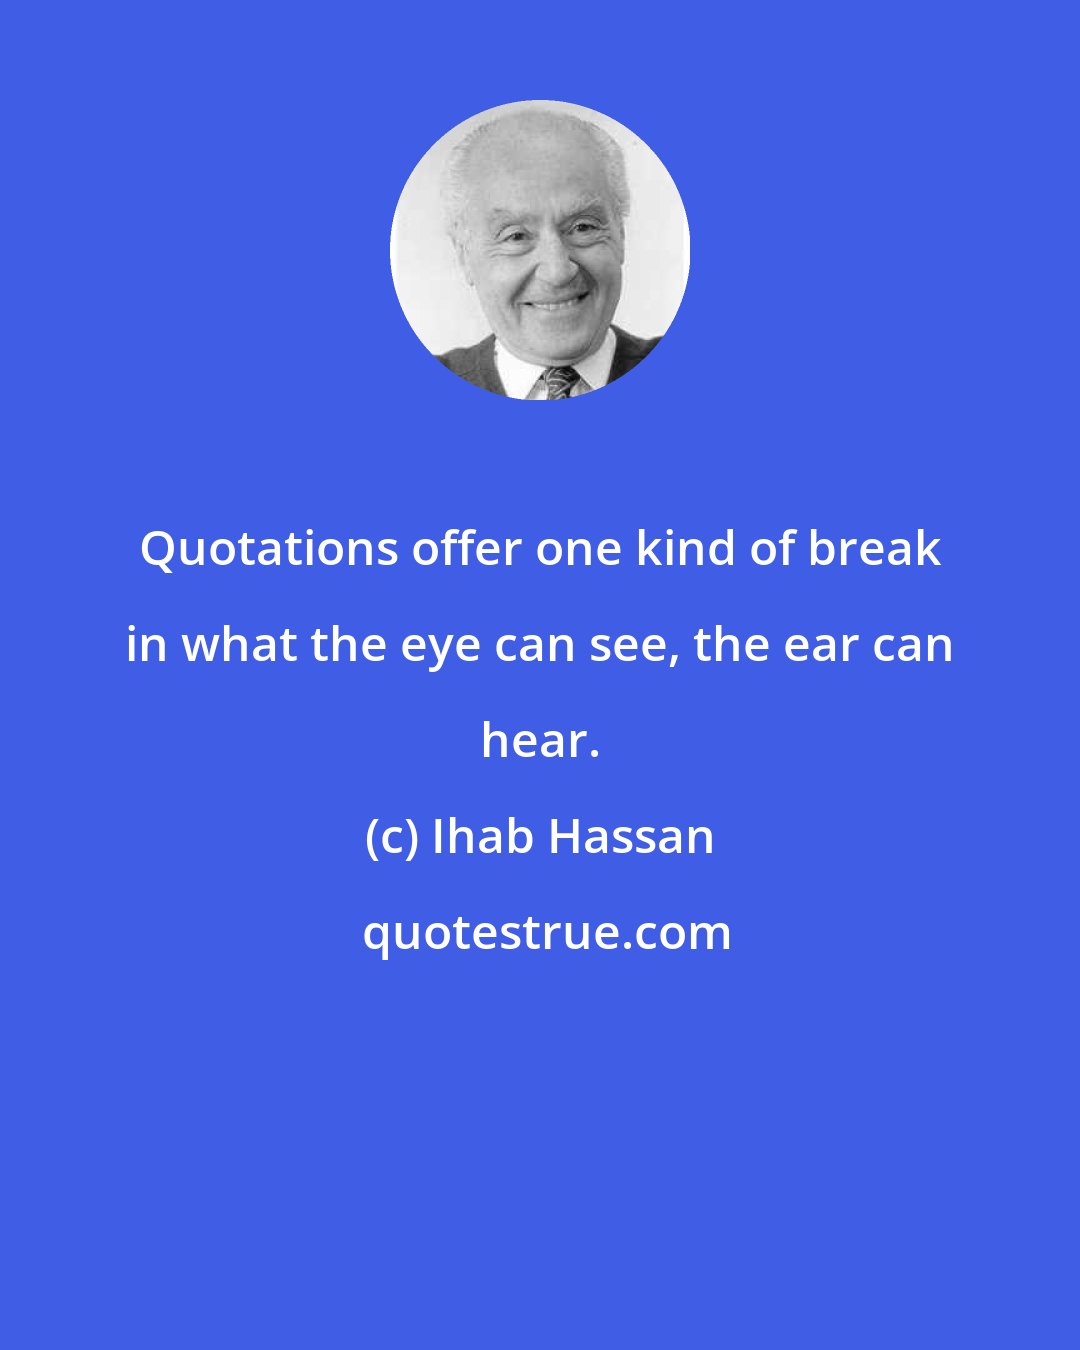 Ihab Hassan: Quotations offer one kind of break in what the eye can see, the ear can hear.